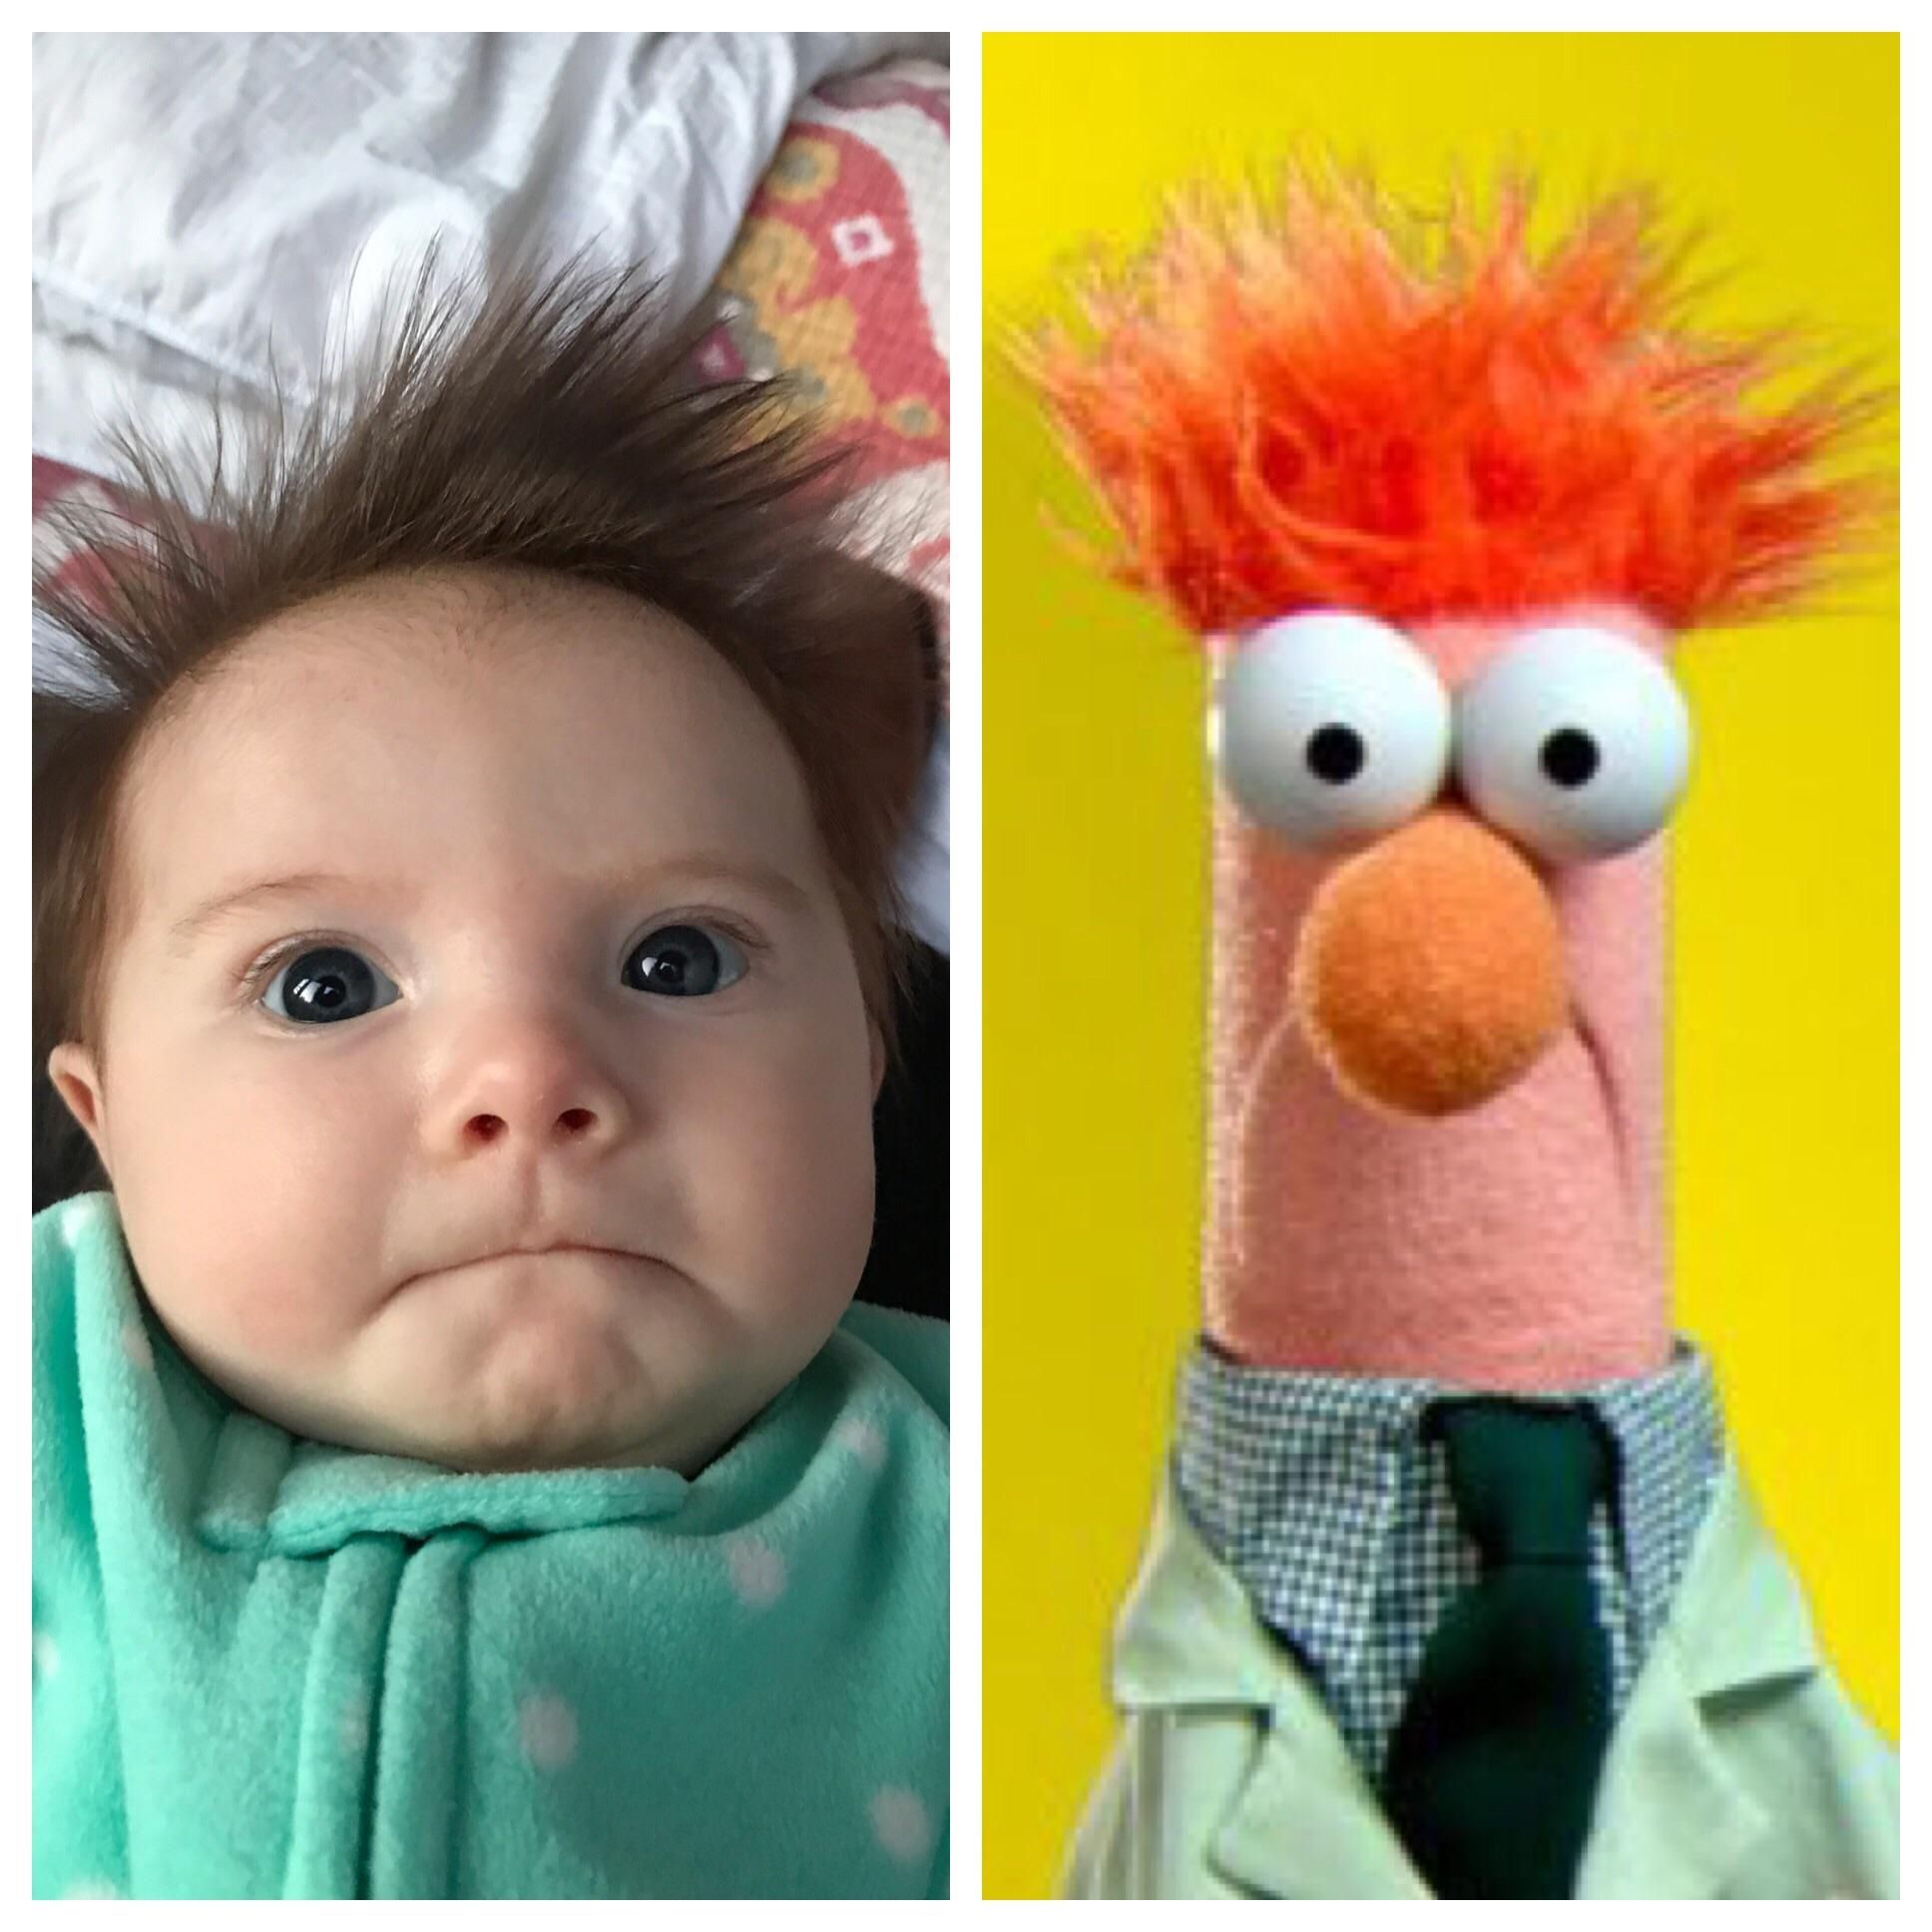 My daughter looks like Beaker from The Muppets.